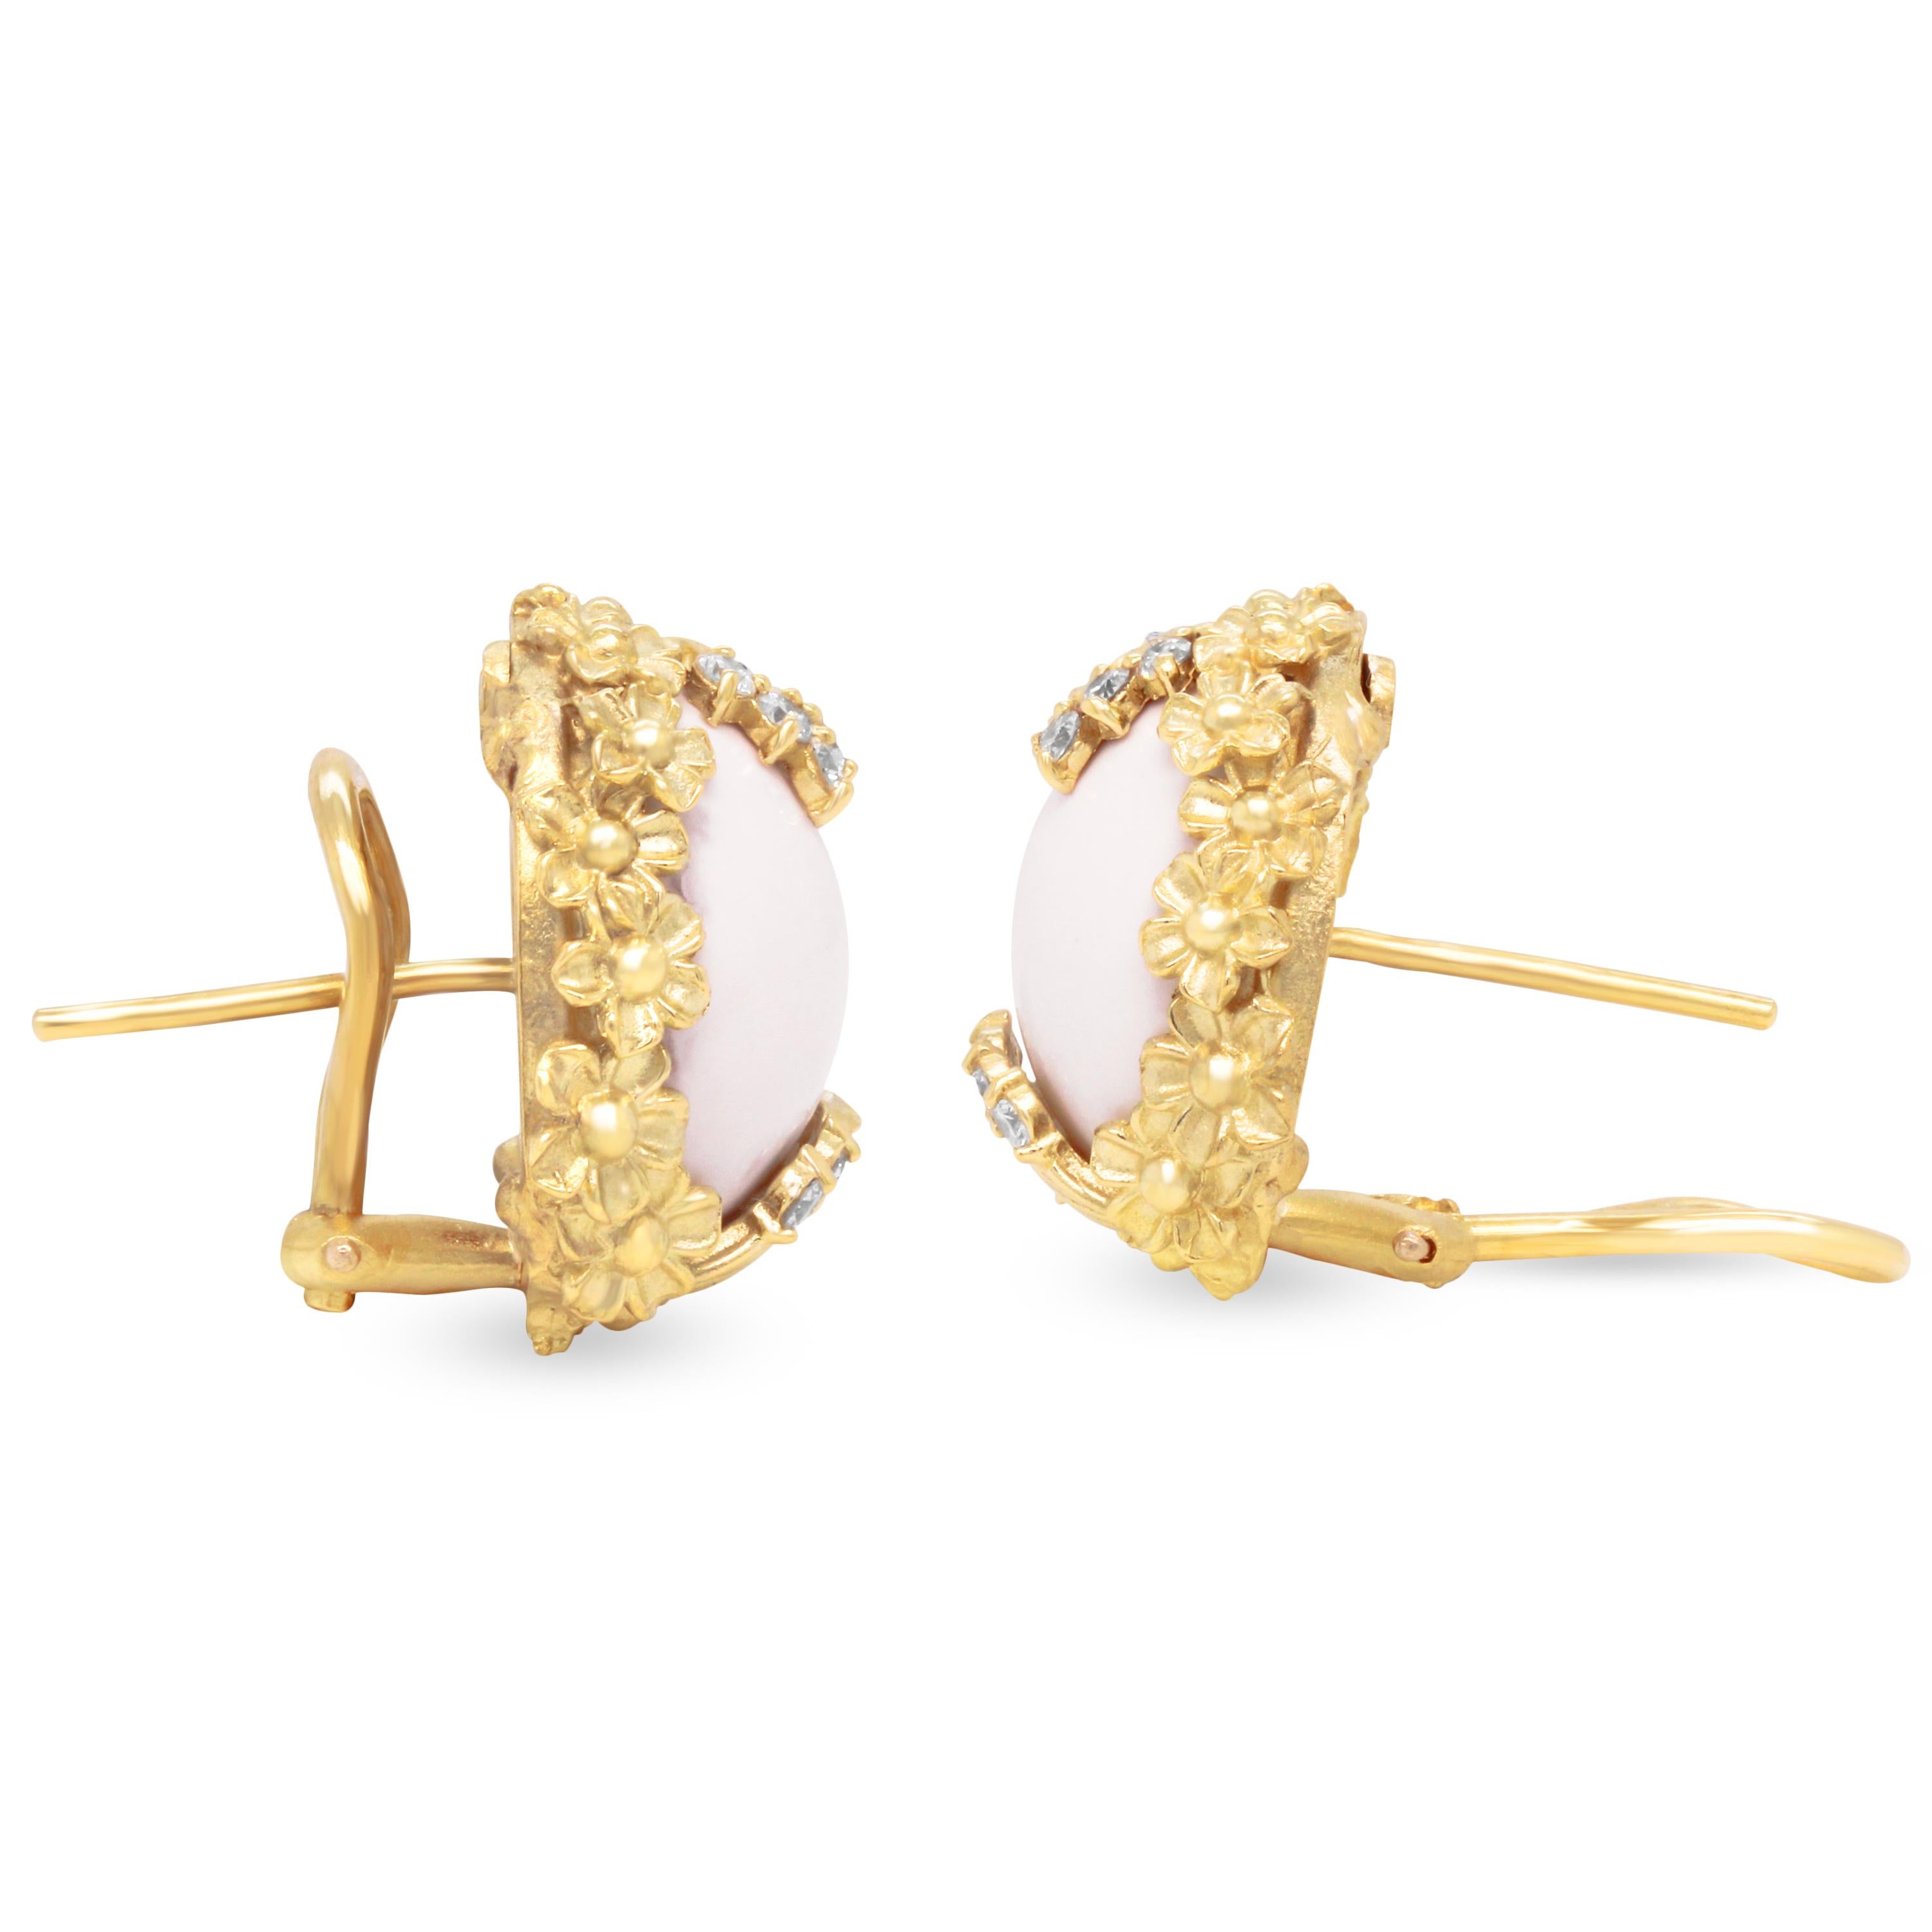 Stambolian 18K Yellow Gold Diamond White Agate Floral Motif Button Earrings

From the 2021 Spring Collection by Stambolian, these floral style earrings feature two oval-cut, White Agate centers with a diamond leaf on the top and bottom. 

Apprx. 25